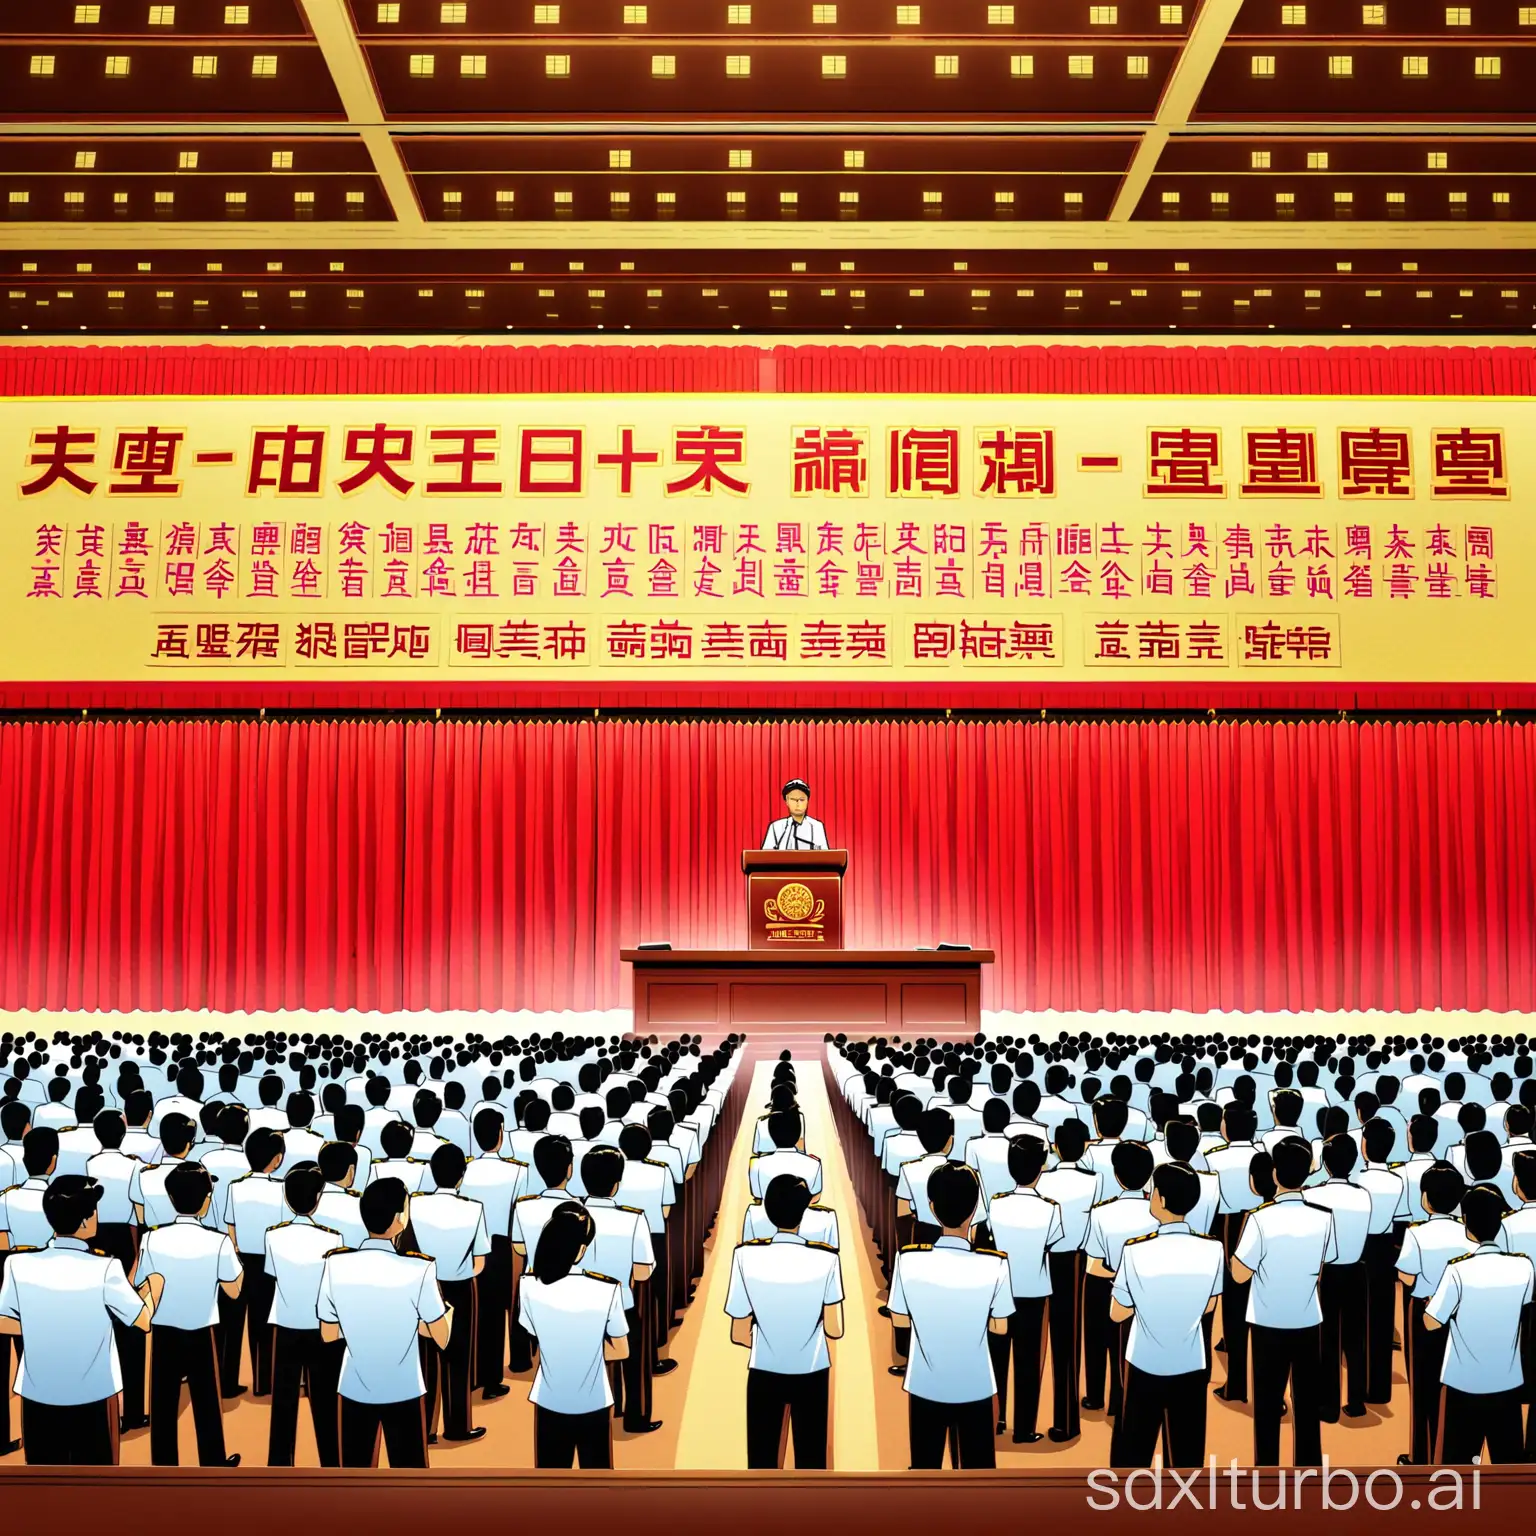 Under the China Postal Savings Bank, a person stands on the stage holding legal and compliant articles and reads aloud, while many employees in uniforms stand below the stage, raising their hands to pledge.